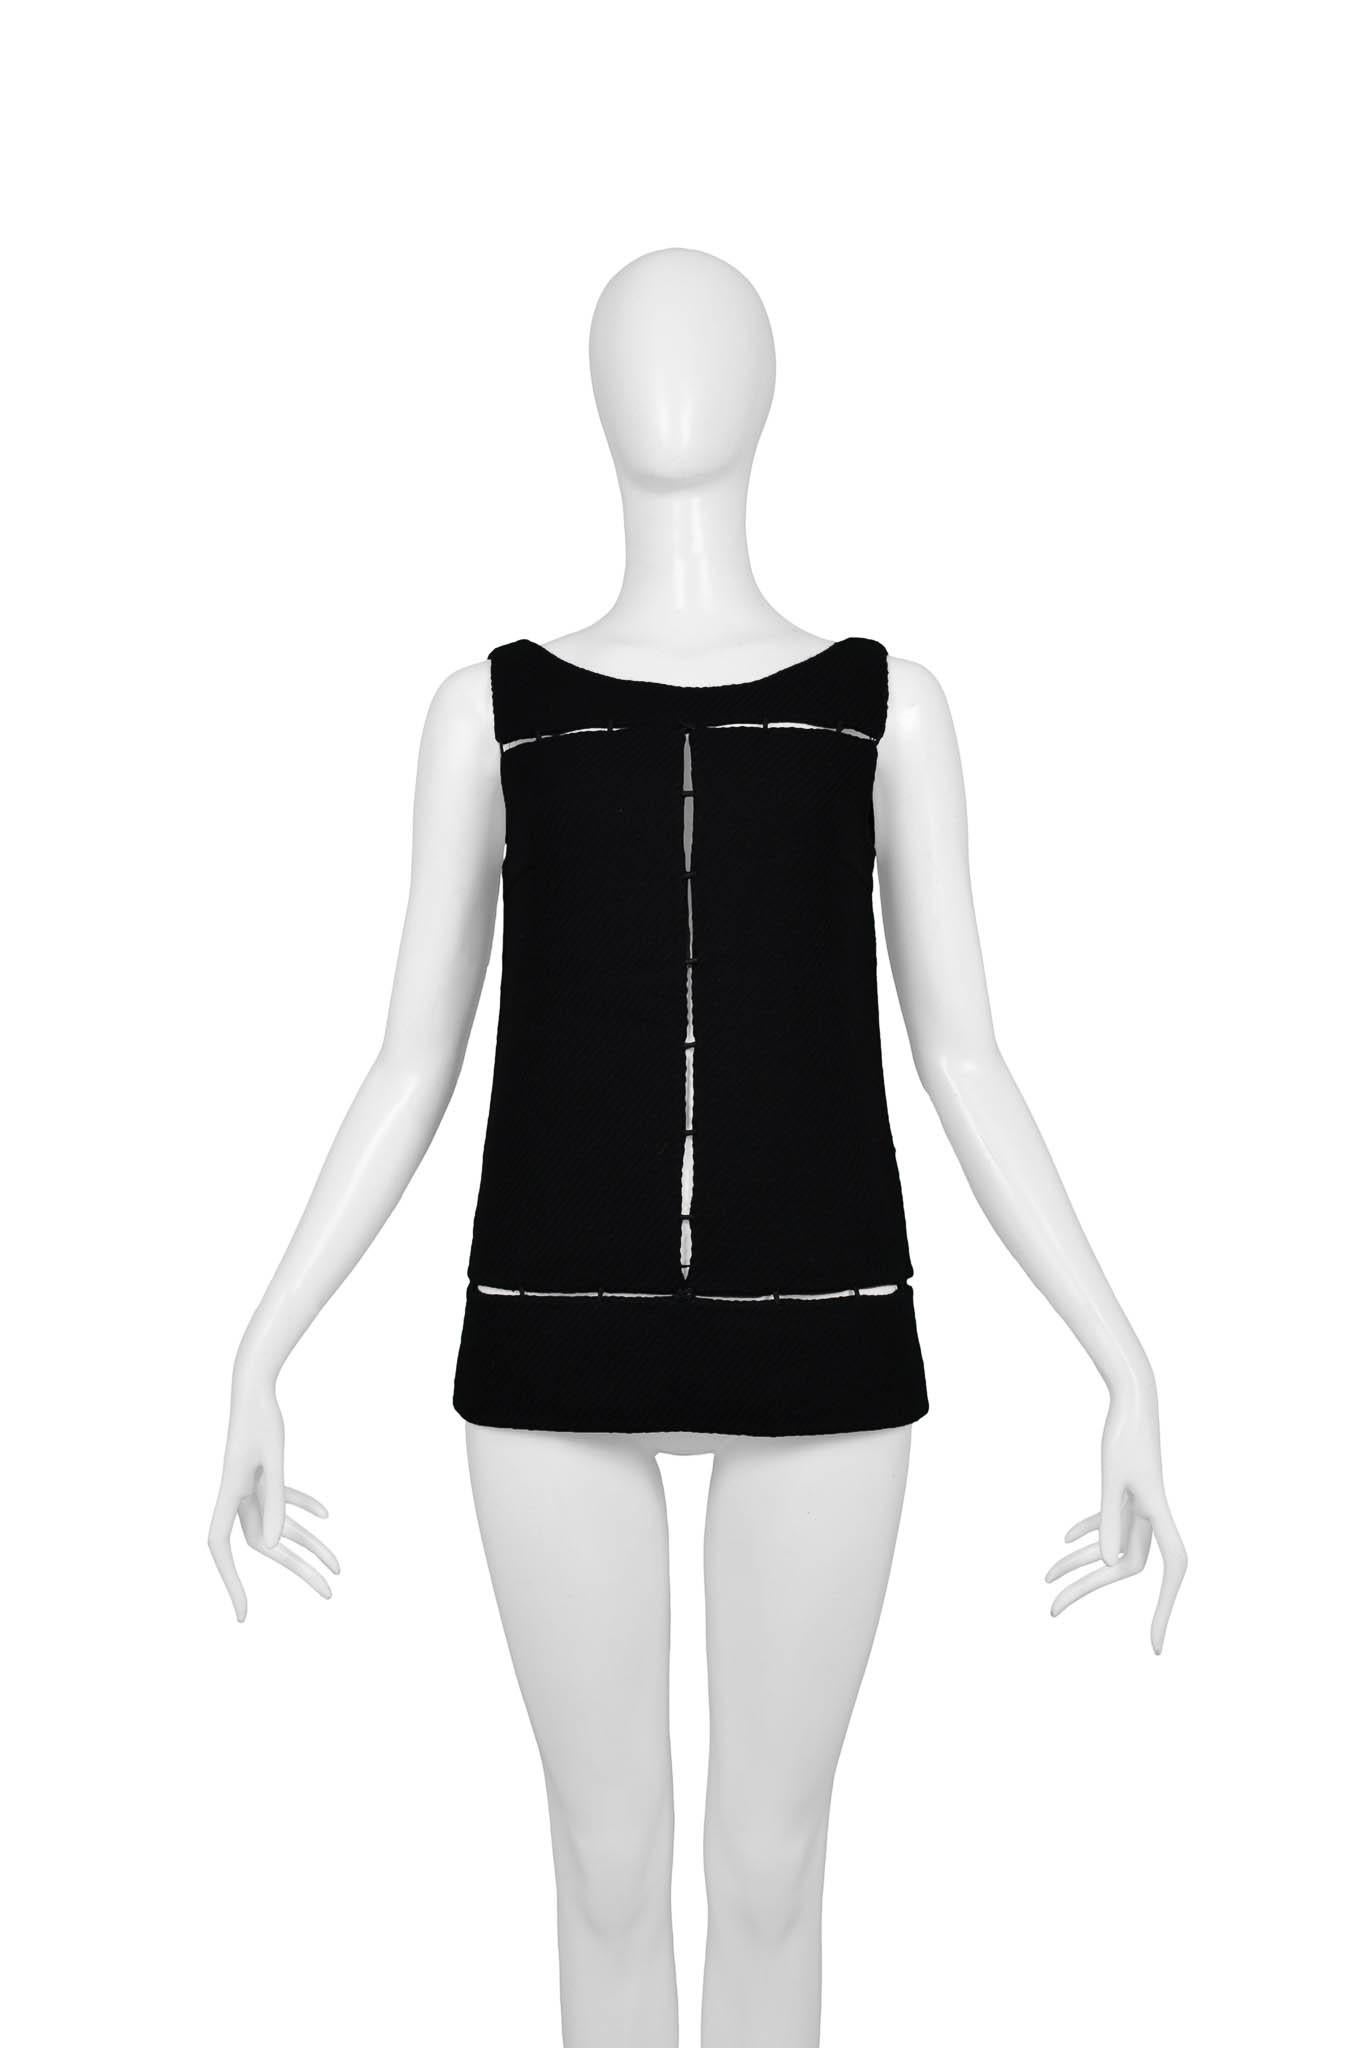 Resurrection Vintage is excited to offer a Prada runway wool top featuring cut-out panels, a sleeveless design, and a side zipper. 

Prada
Size: 38
100% Wool
Excellent Vintage Condition
Authenticity Guaranteed